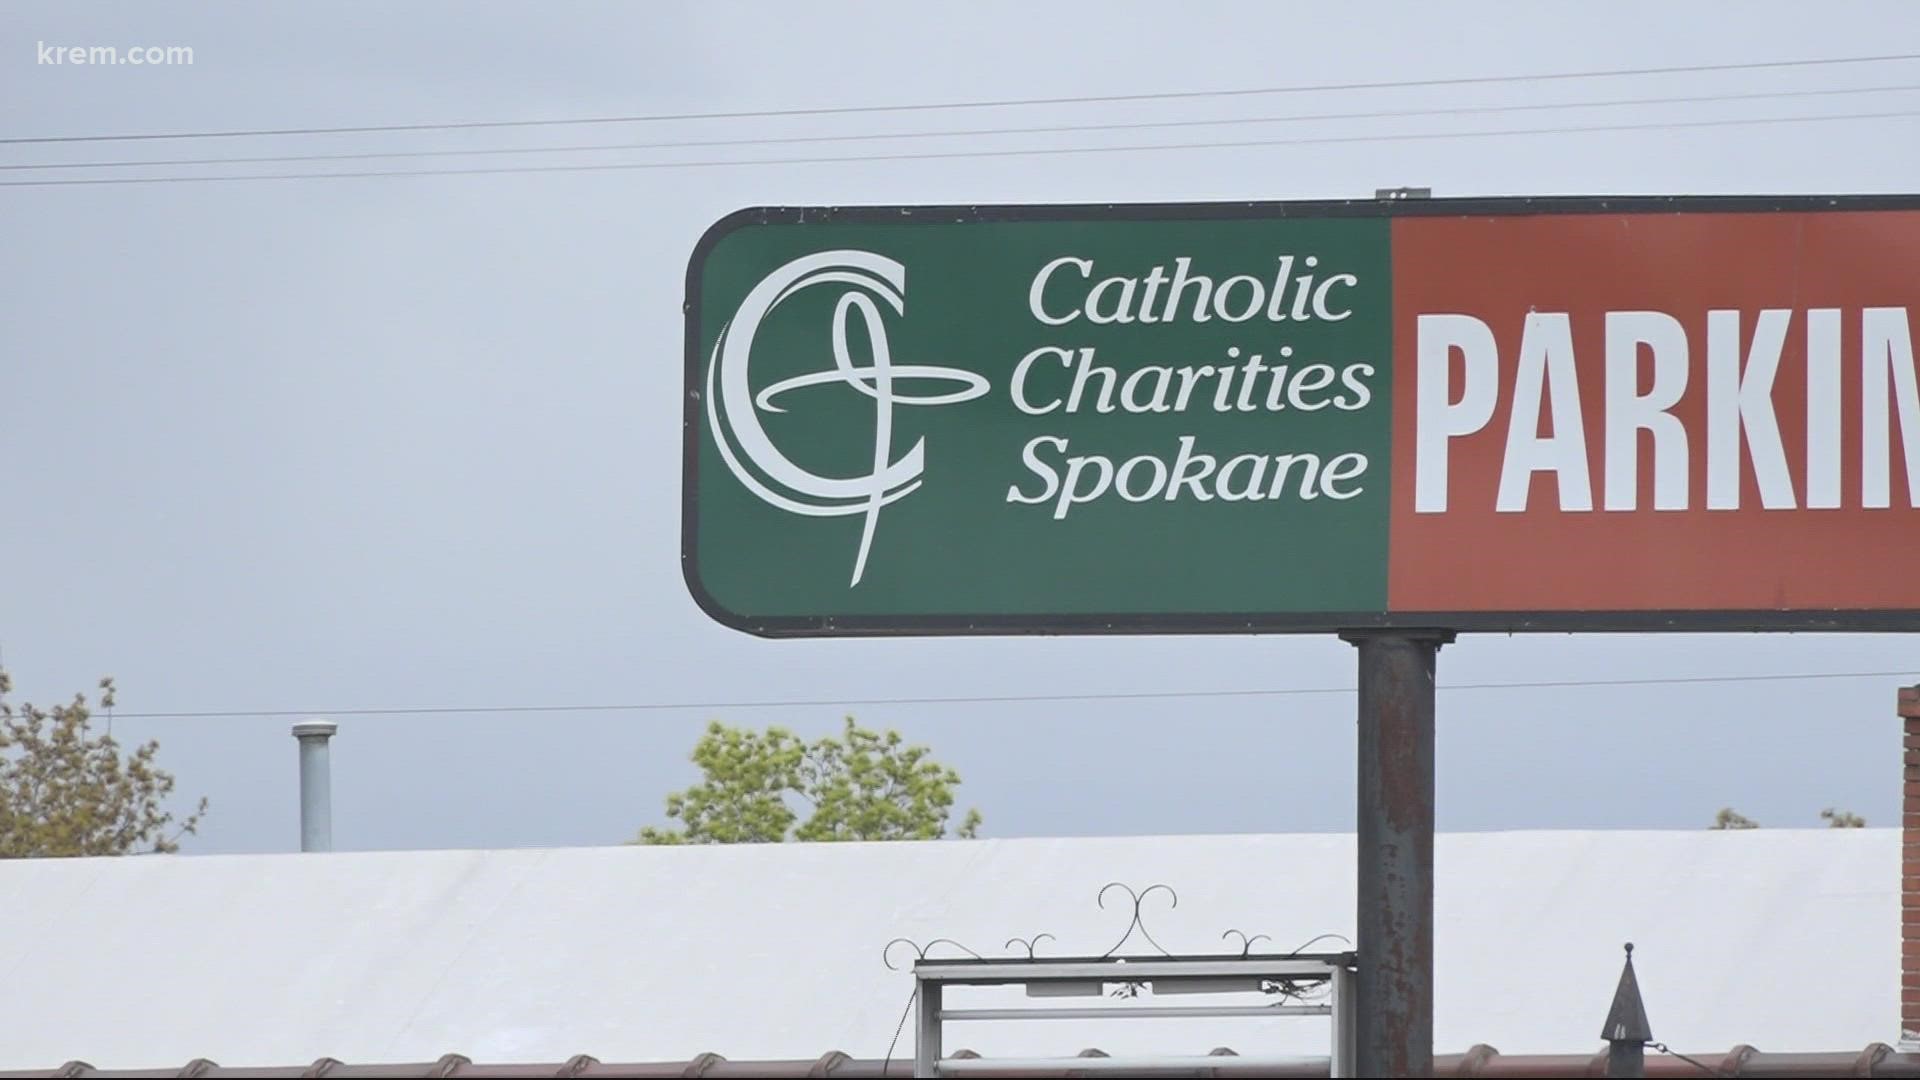 Mayor Woodward announced that Catholic Charities will relocate House of Charity outside of downtown Spokane and build a new low-barrier shelter.